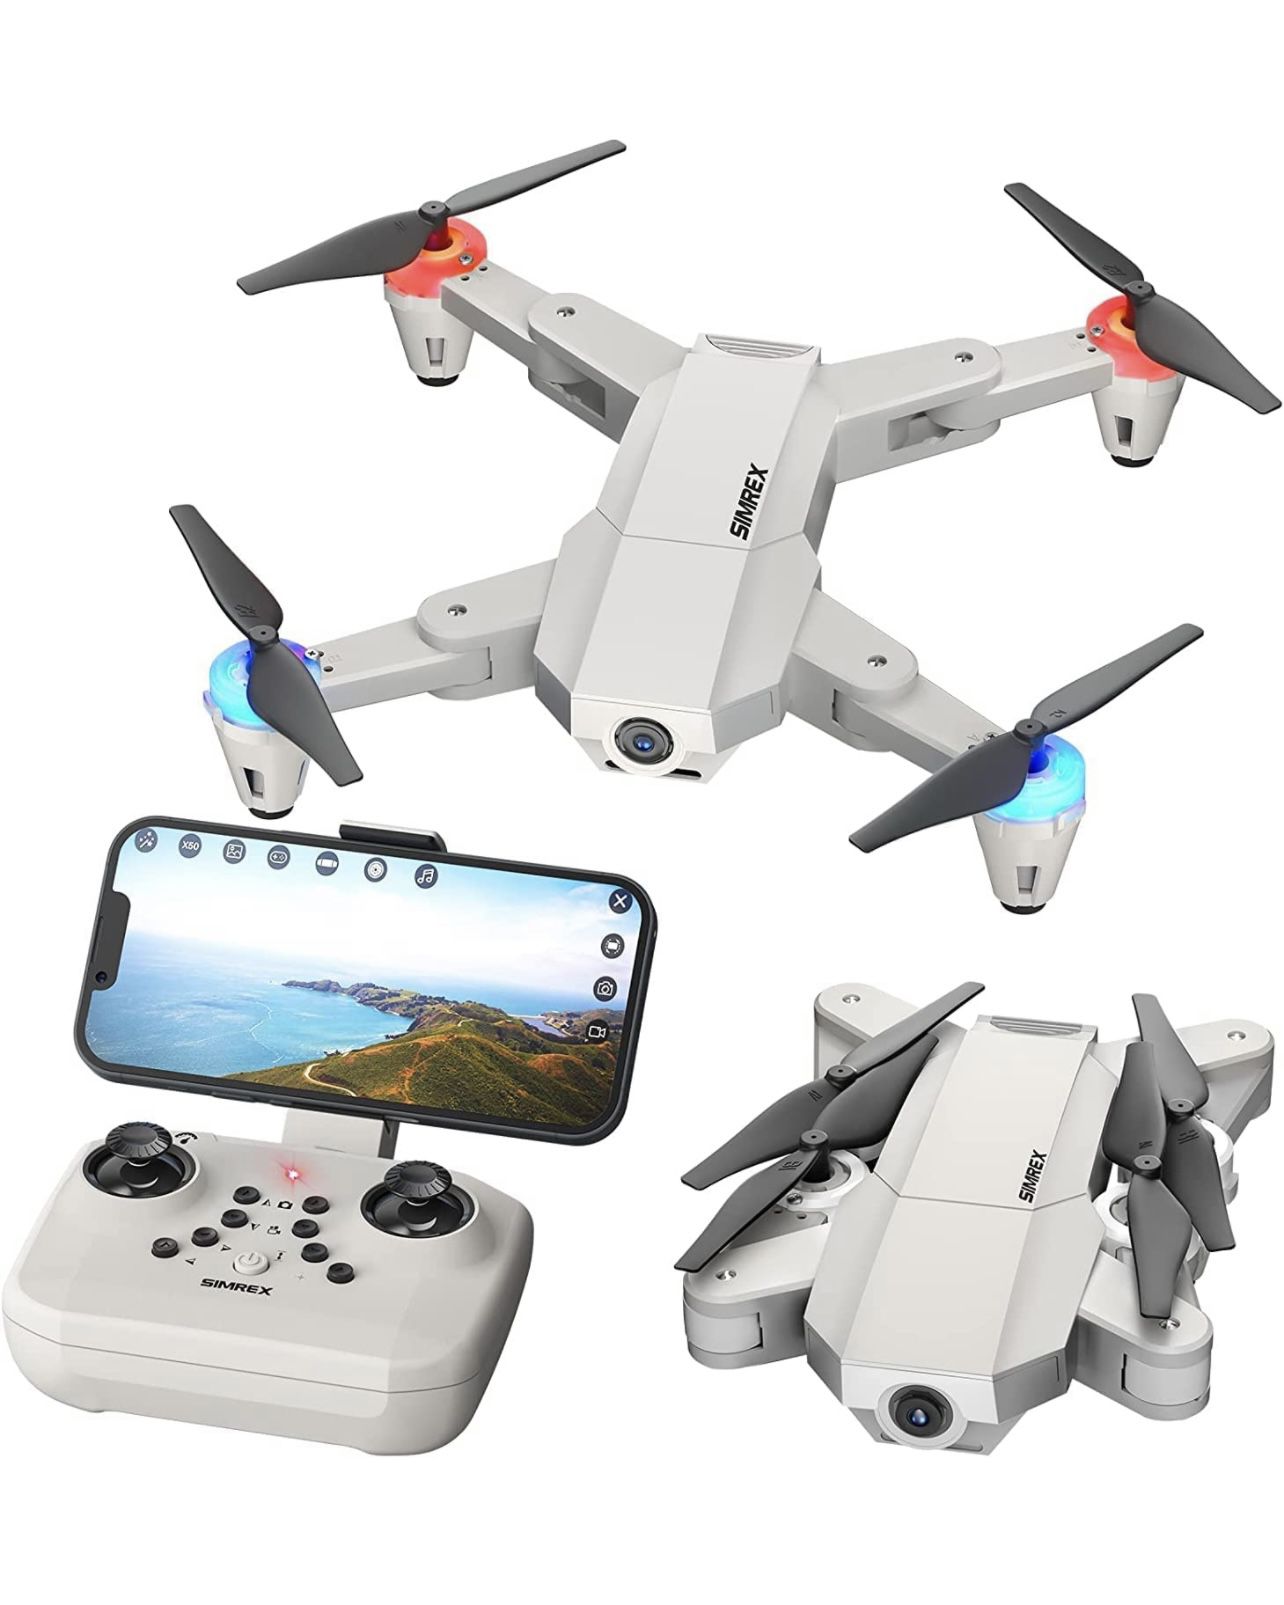 mini Drone Optical Flow Positioning RC Quadcopter with 720P HD Camera, Altitude Hold Headless Mode, Foldable FPV Drones WiFi Live Video 3D Flips Easy 